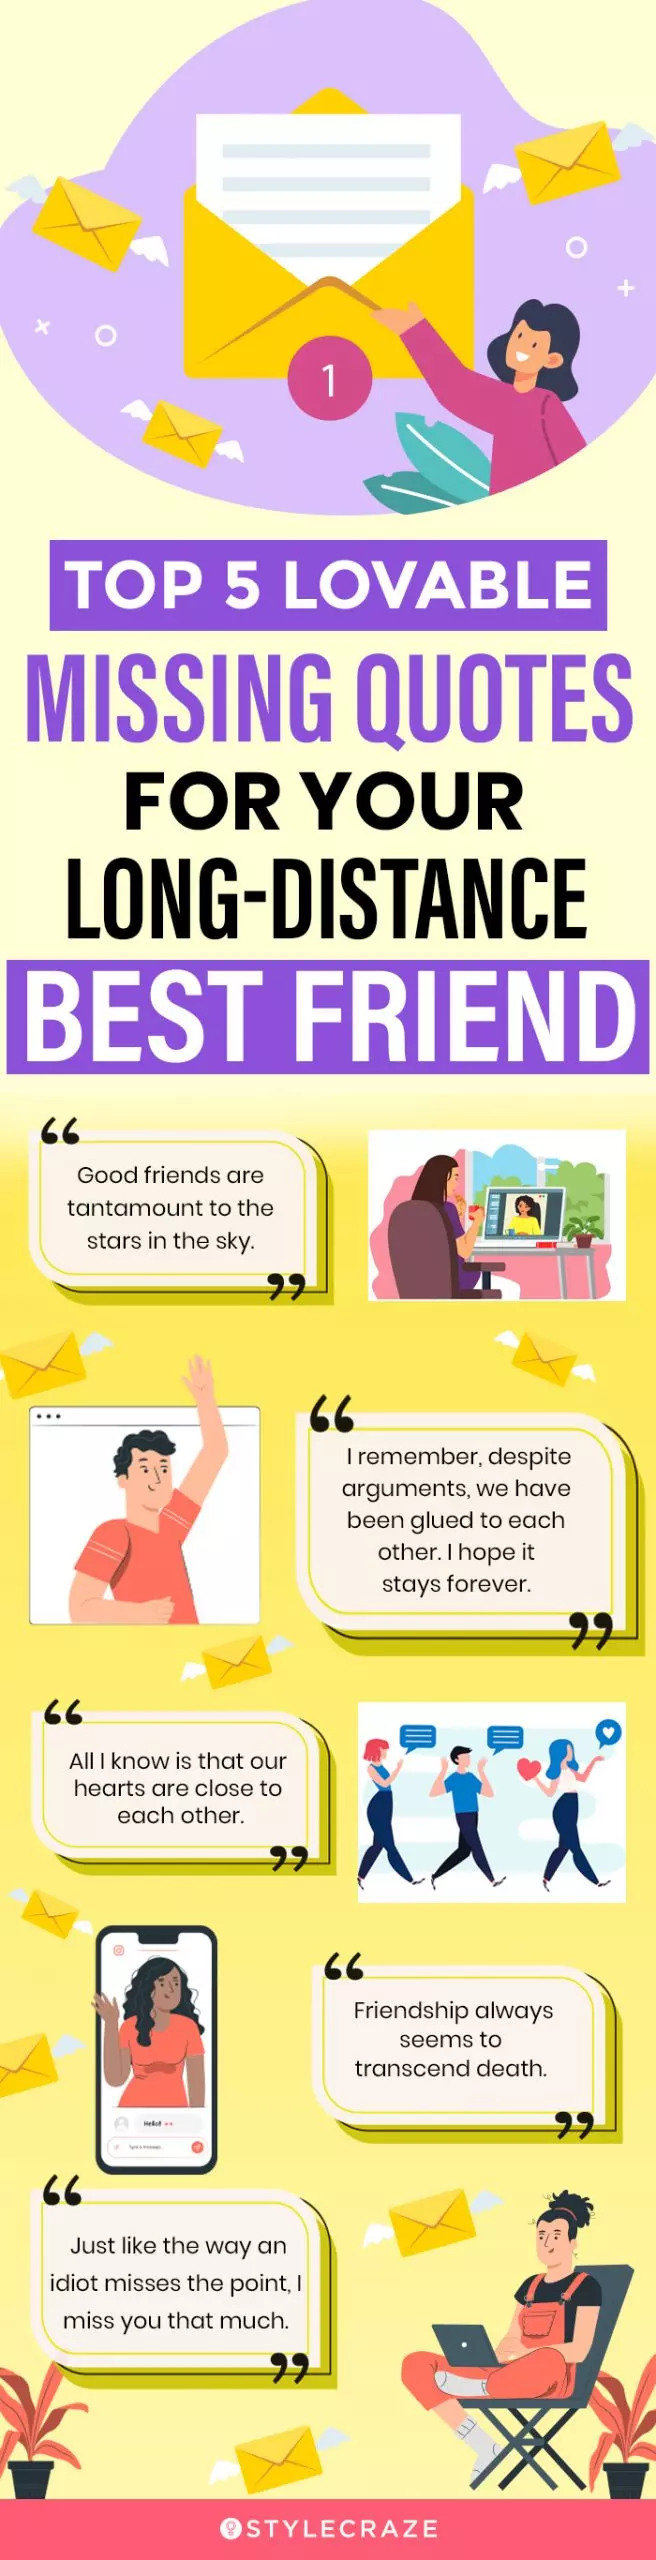 top 5 lovable missing quotes for your long distance best friend (infographic)